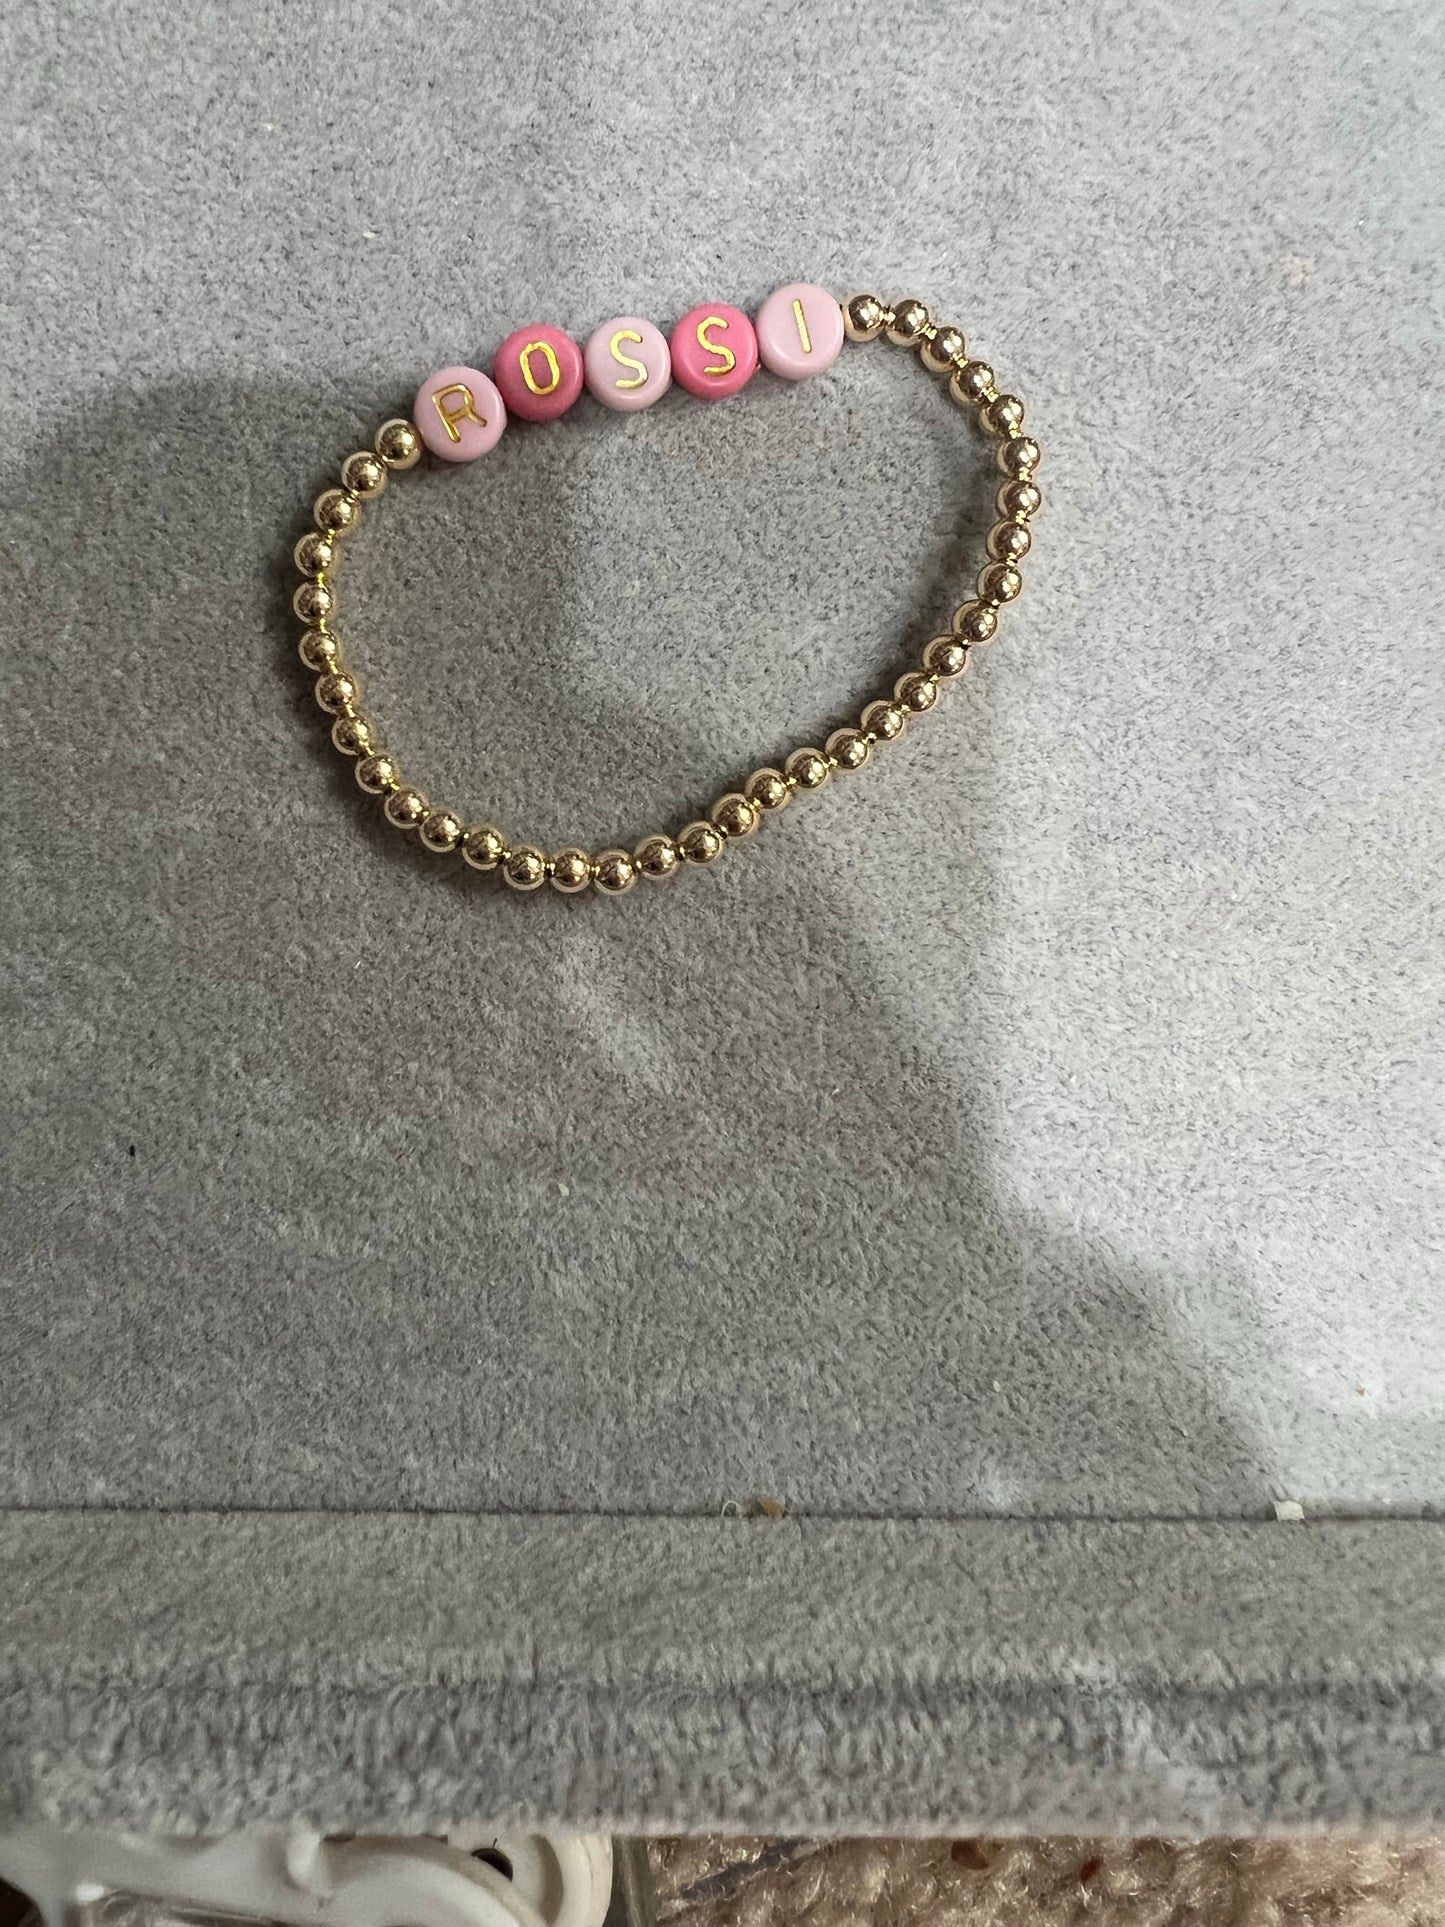 4mm gold ball bracelet with rose, pink with gold letters